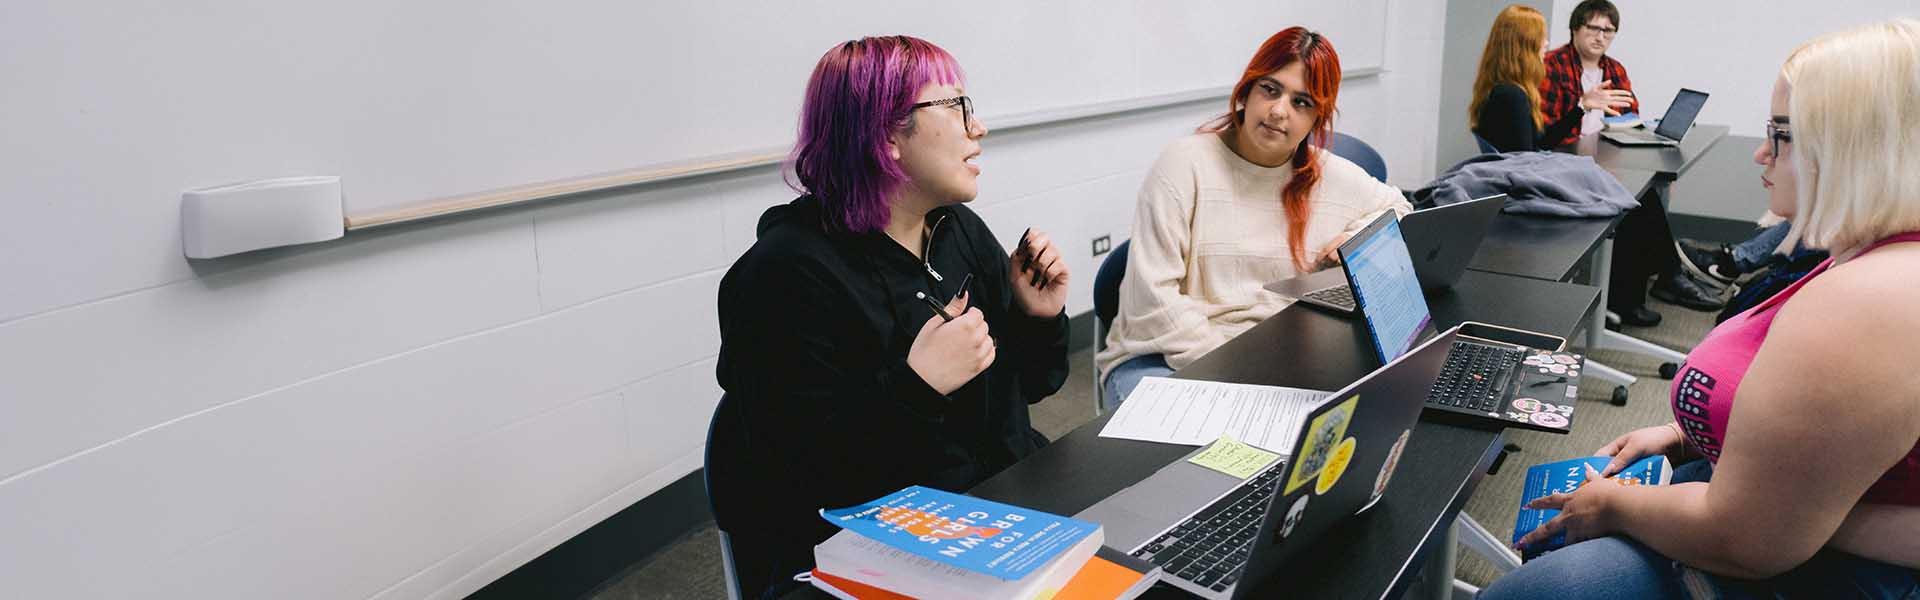 Three students in discussion at class